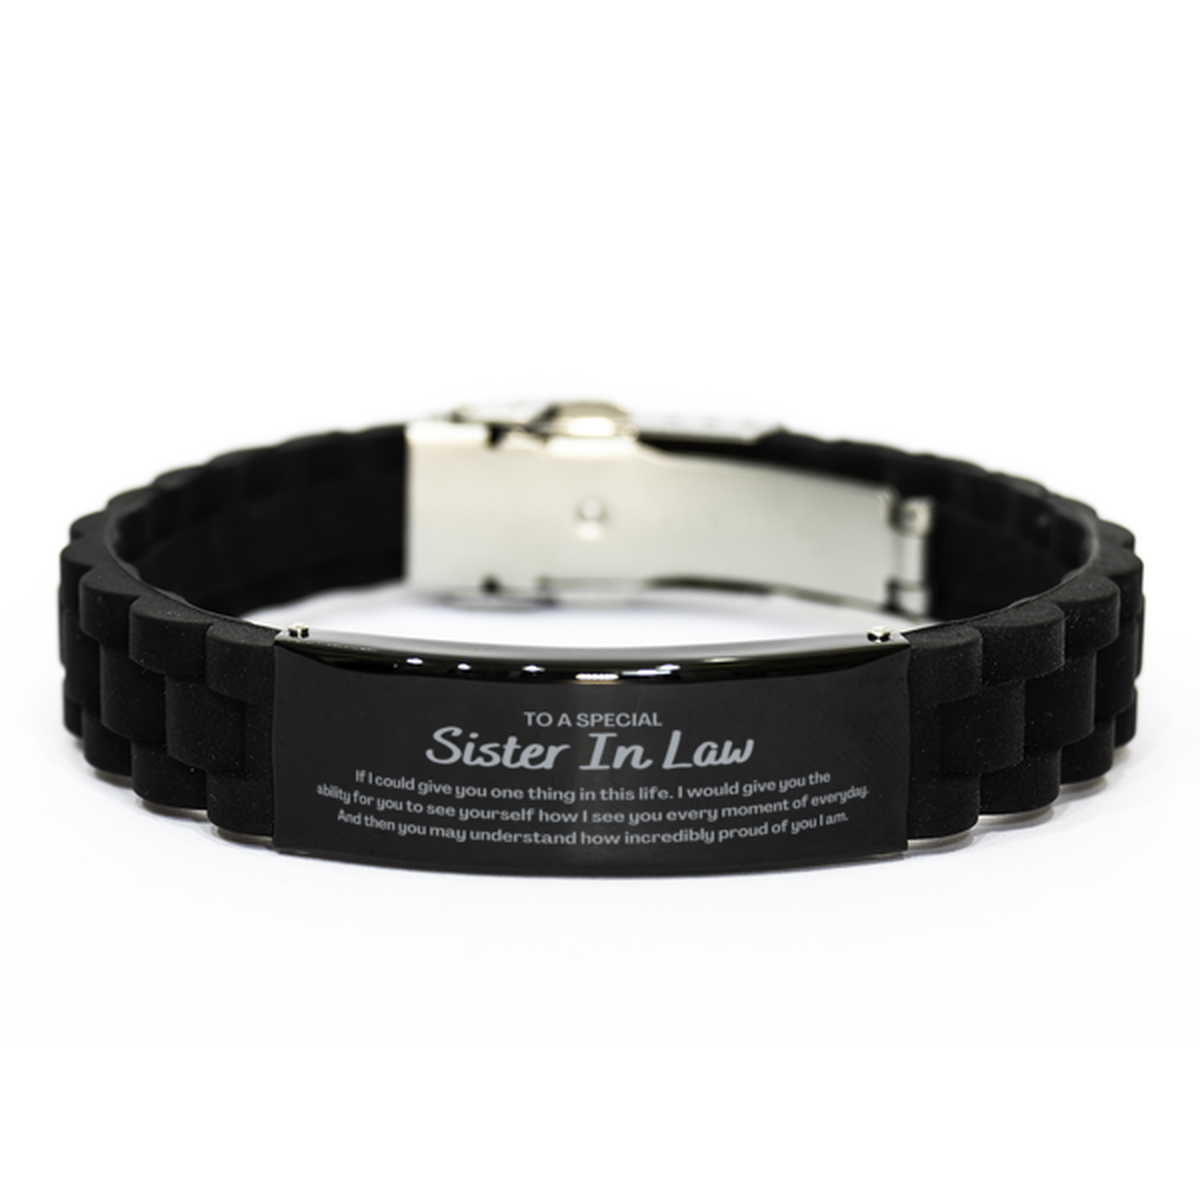 To My Sister In Law Black Glidelock Clasp Bracelet, Gifts For Sister In Law Engraved, Inspirational Gifts for Christmas Birthday, Epic Gifts for Sister In Law To A Special Sister In Law how incredibly proud of you I am